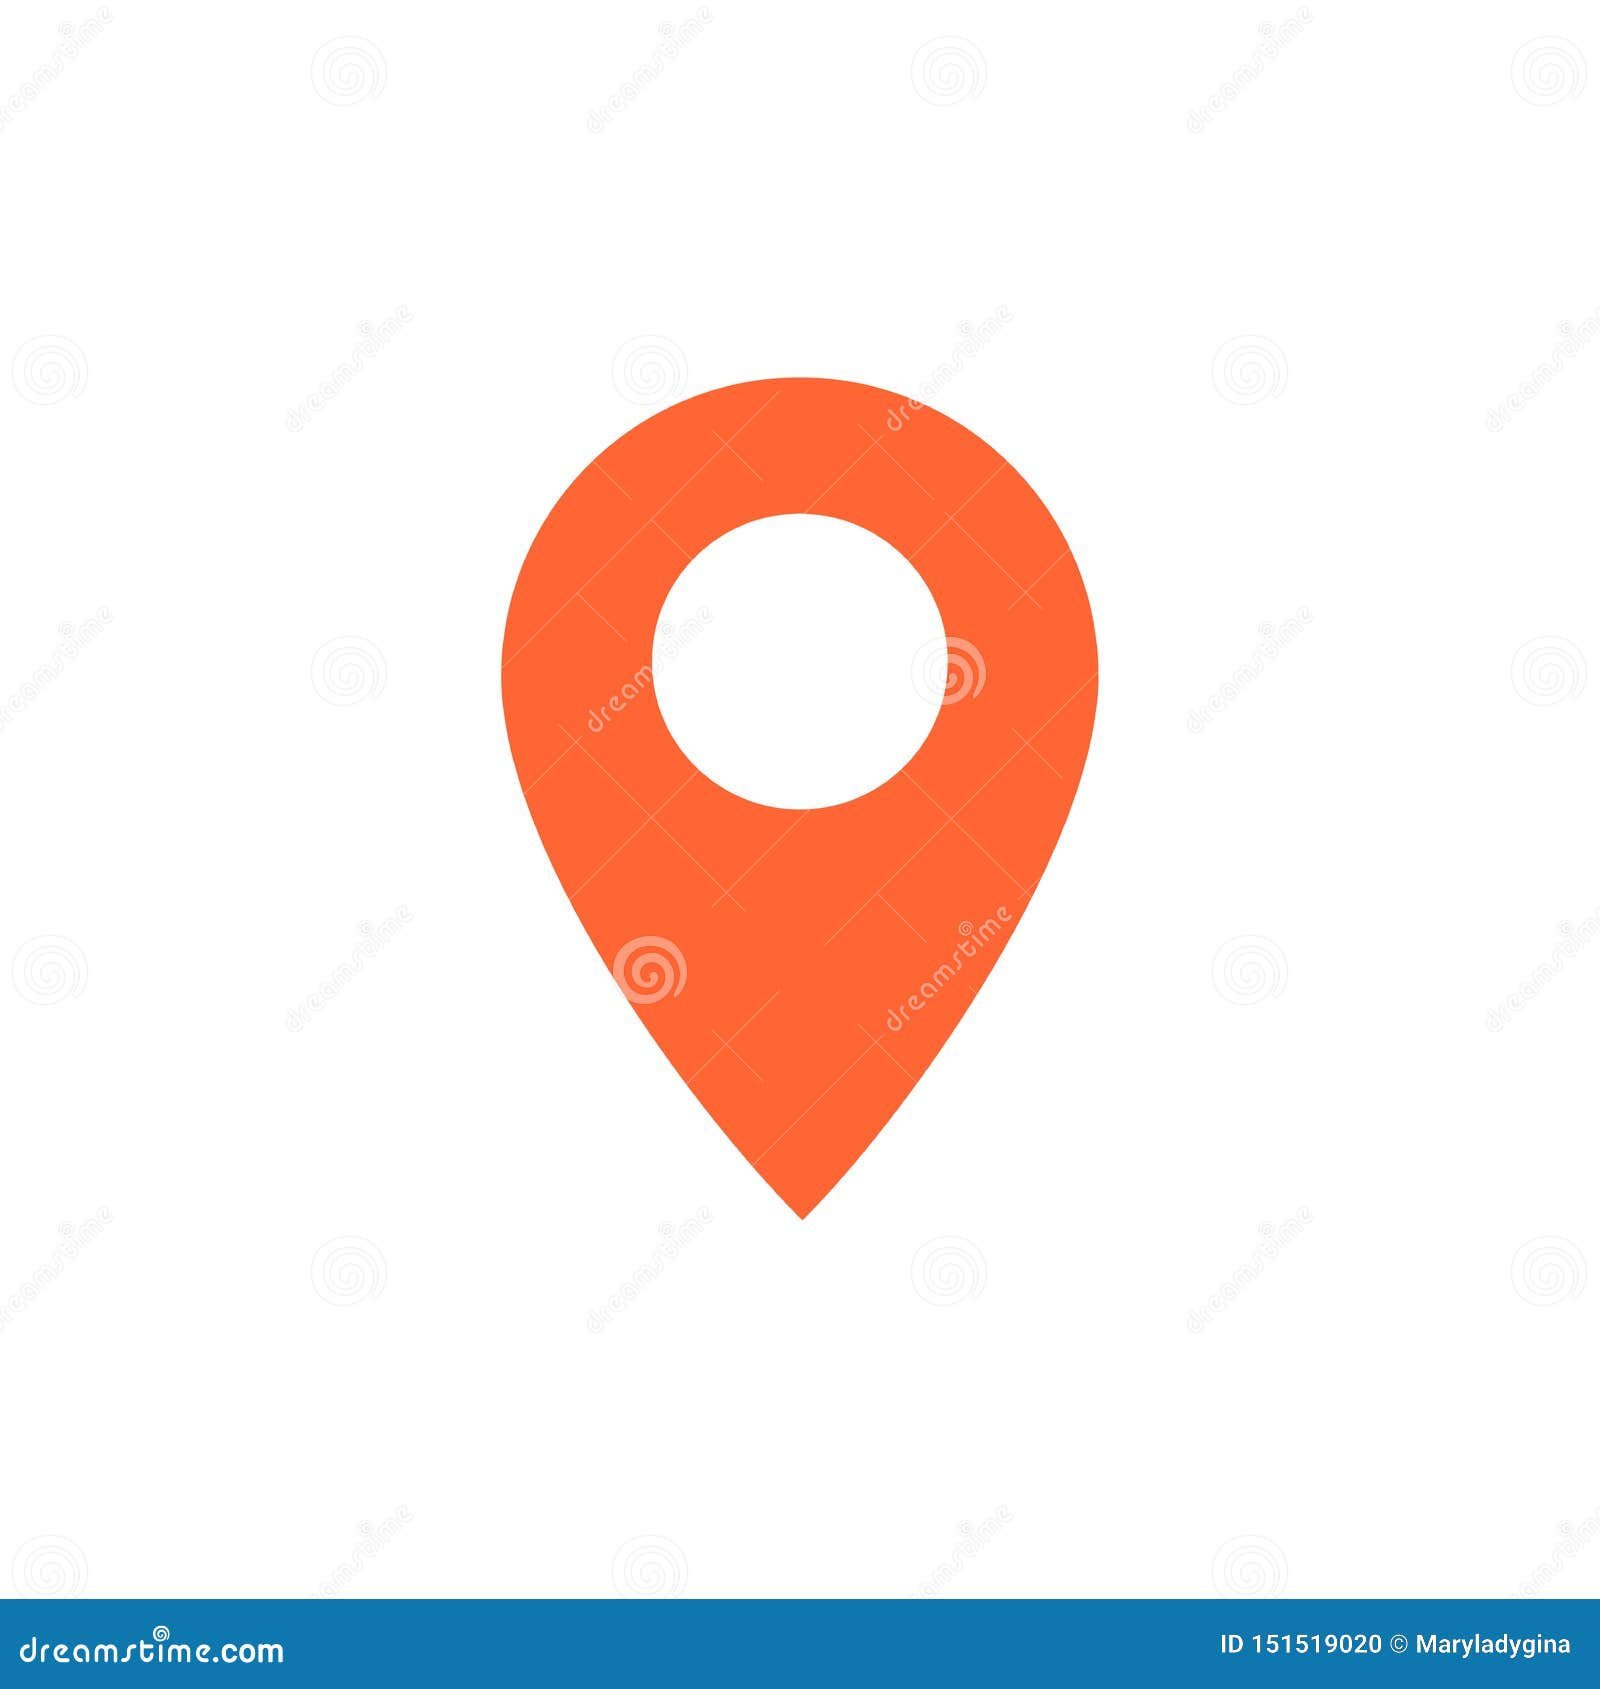 destination  icon. map pointer icon.   for web  and mobile app